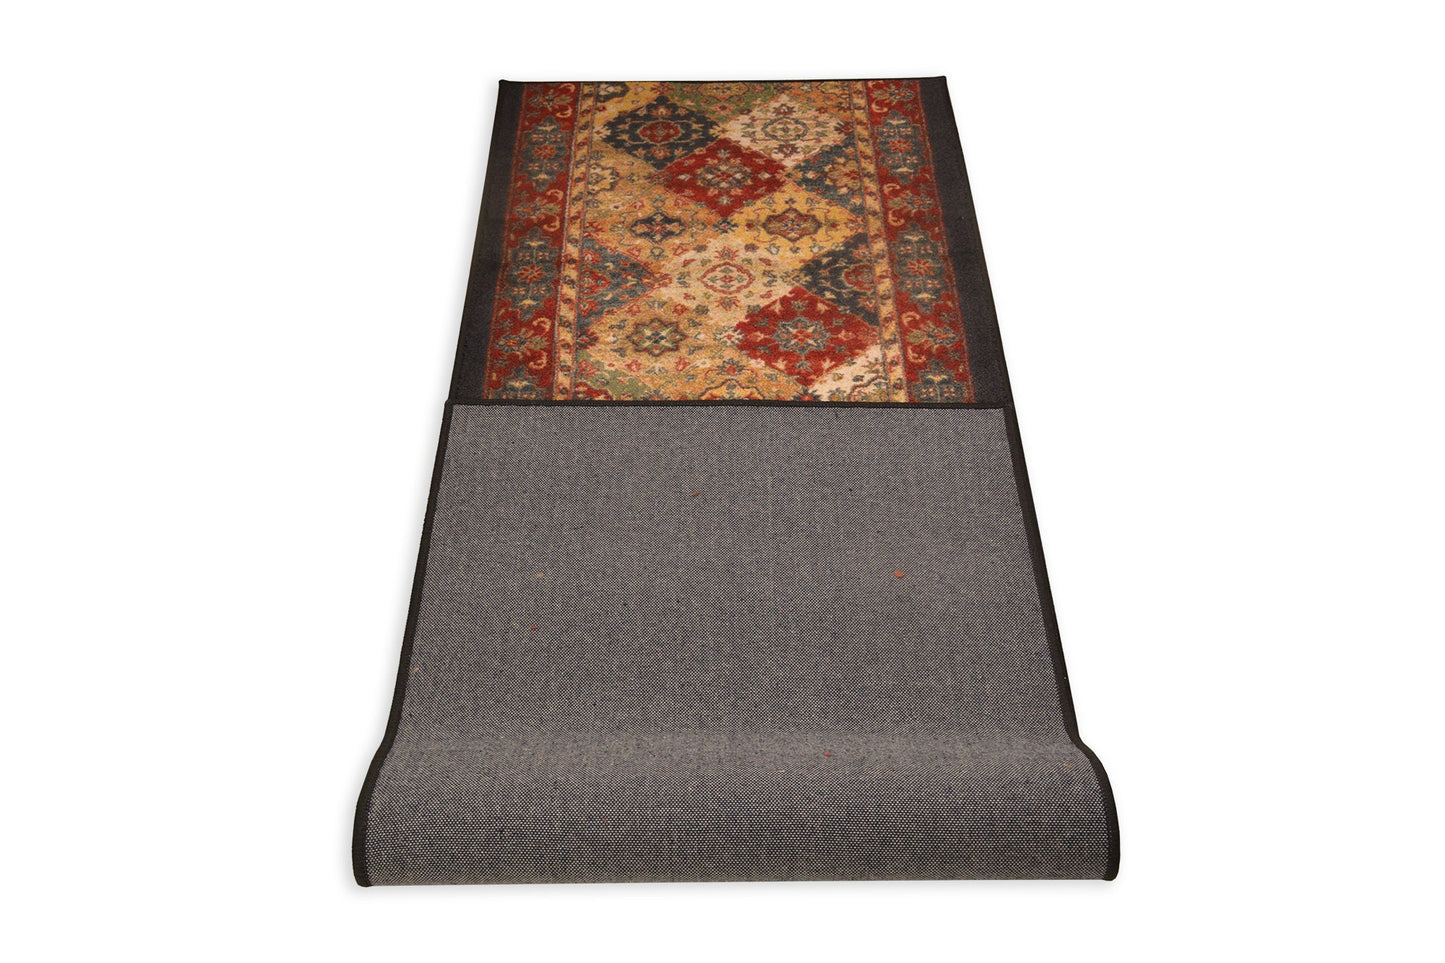 Custom Size Runner Rug Antique Oriental Bakhtiari Persian Design, Canvas Backing Pick Your Own Size By Up to 50 Ft, 26" or 35" Wide